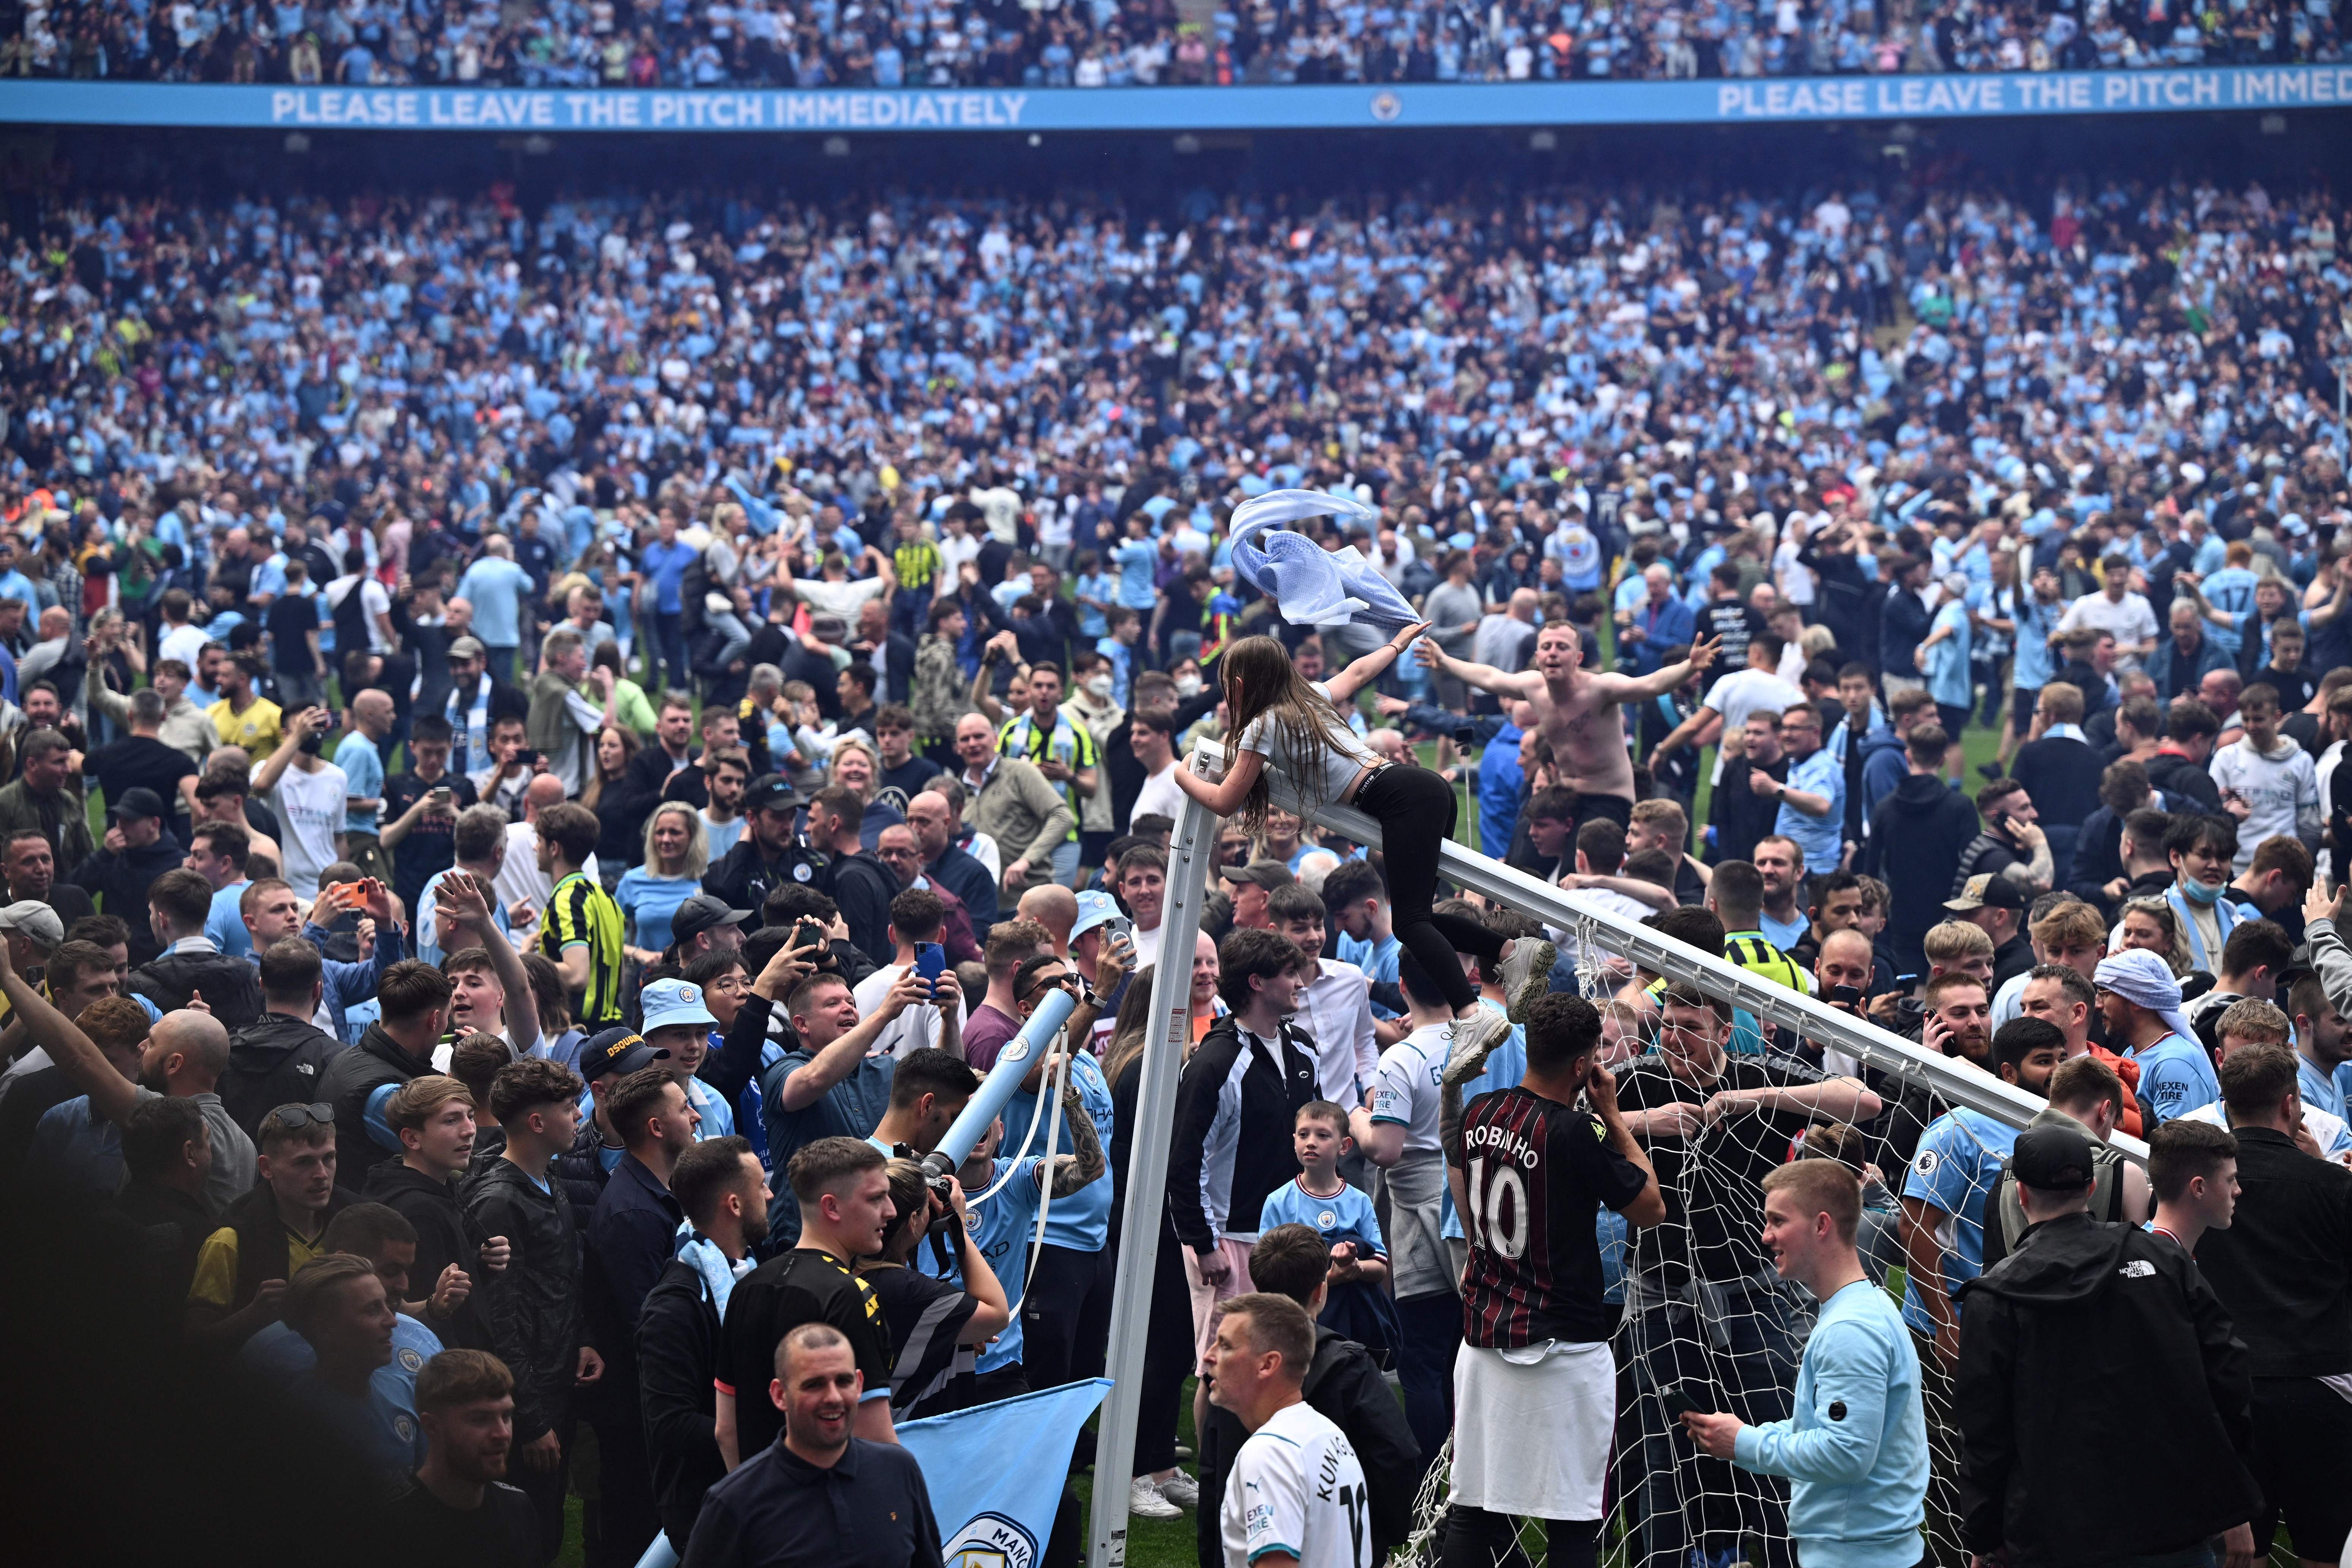 A large number of Manchester City fans entered the pitch after Pep Guardiola’s side secured the Premier League title